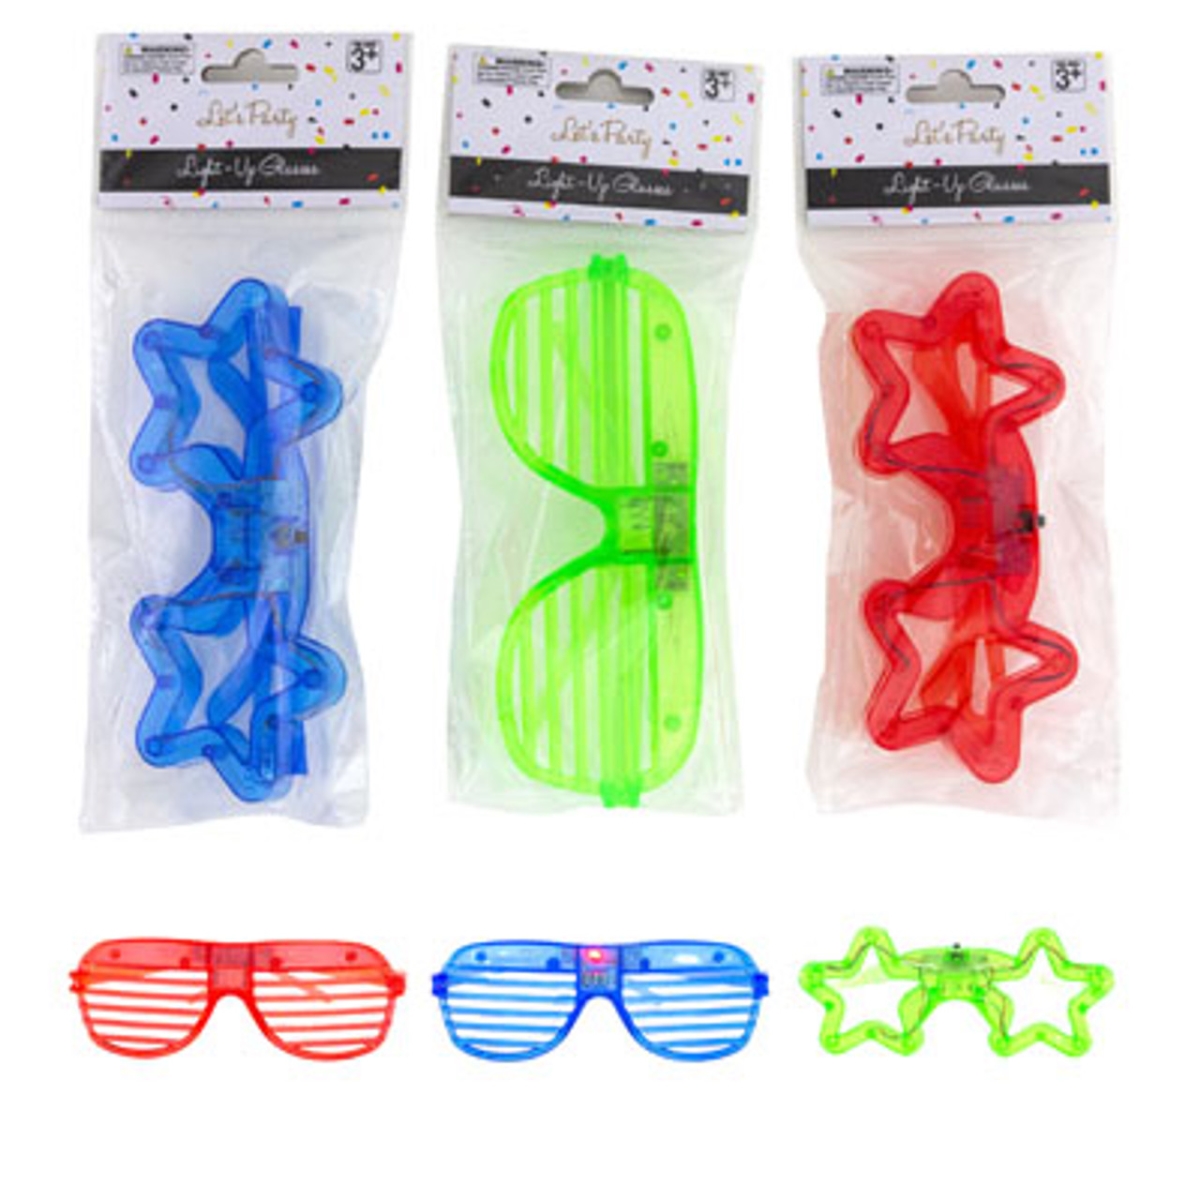 Picture of Regent Products G24086 Star Grill 2 Style Bag Lite Up Blink Glasses with Header Insert, 6 Assorted Color